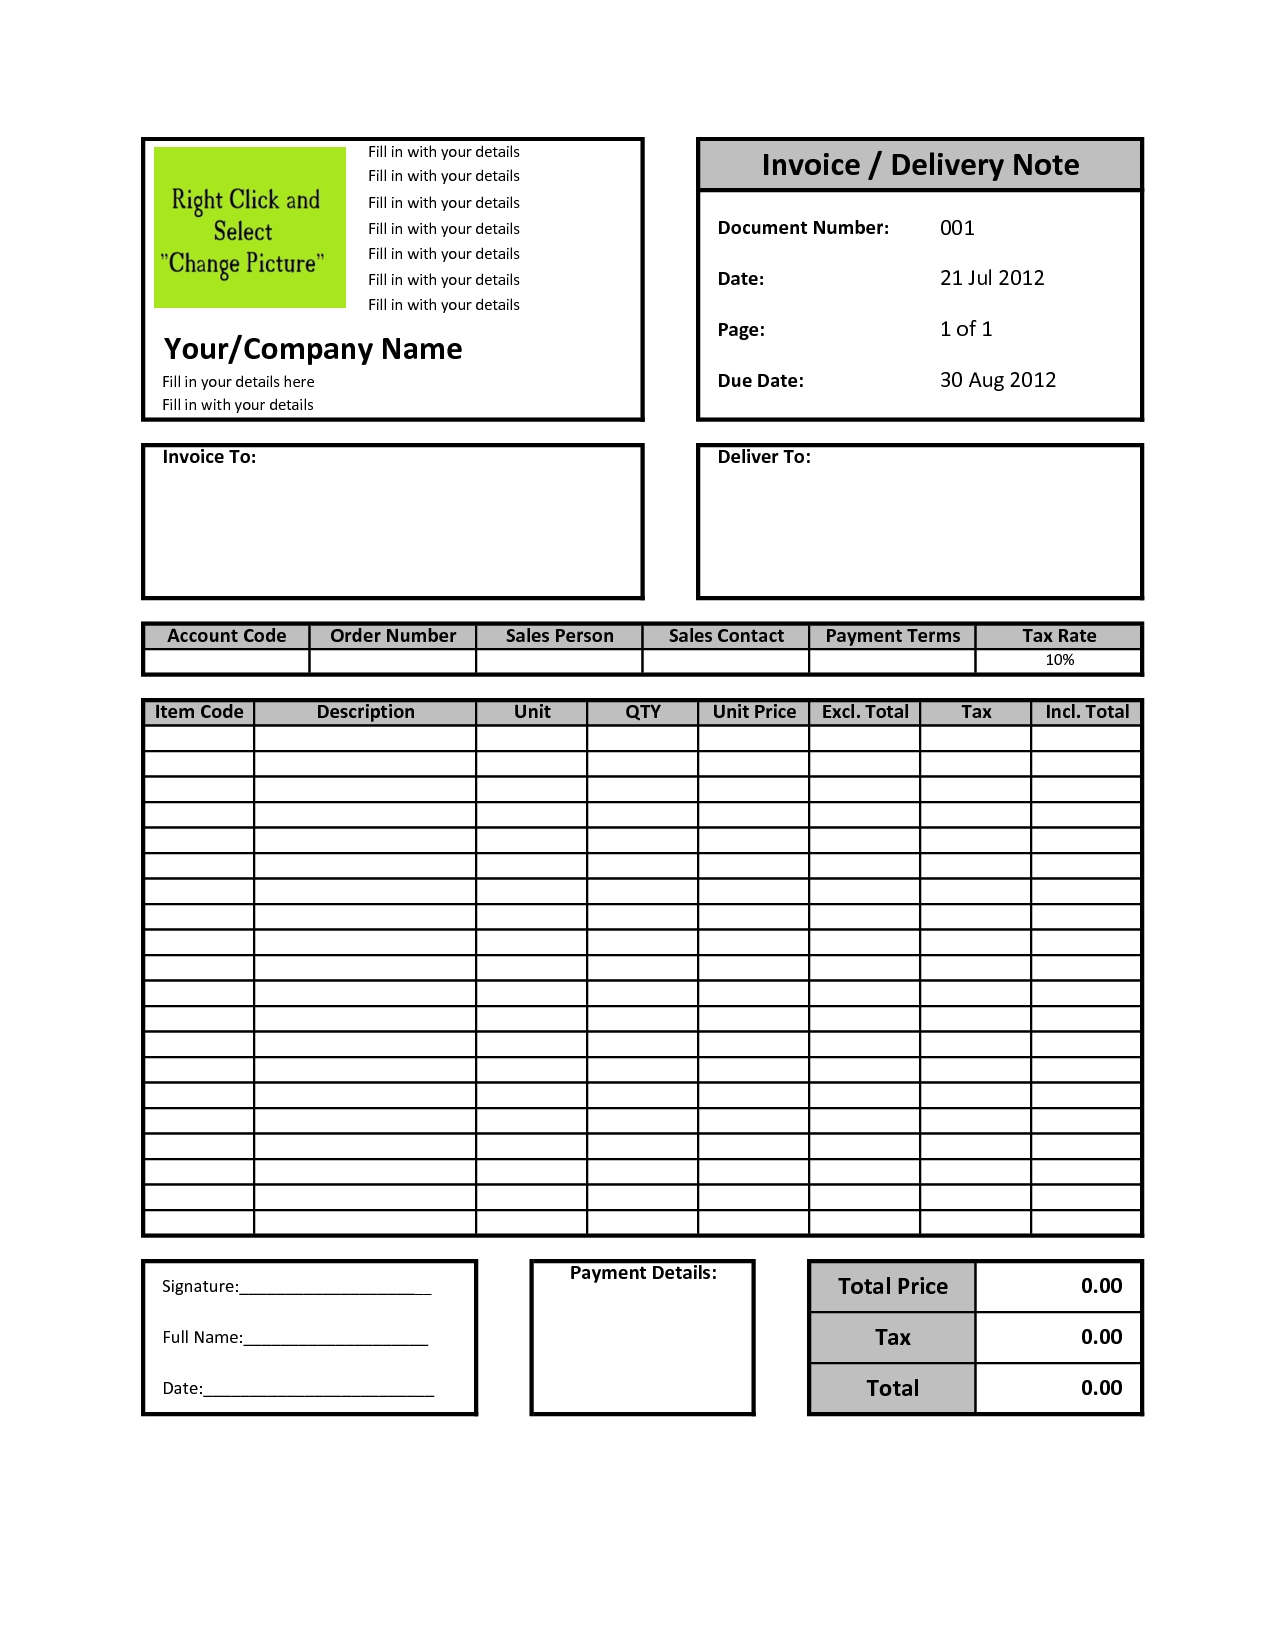 invoice excel download download free excel invoice template gantt chart excel template 1275 X 1650